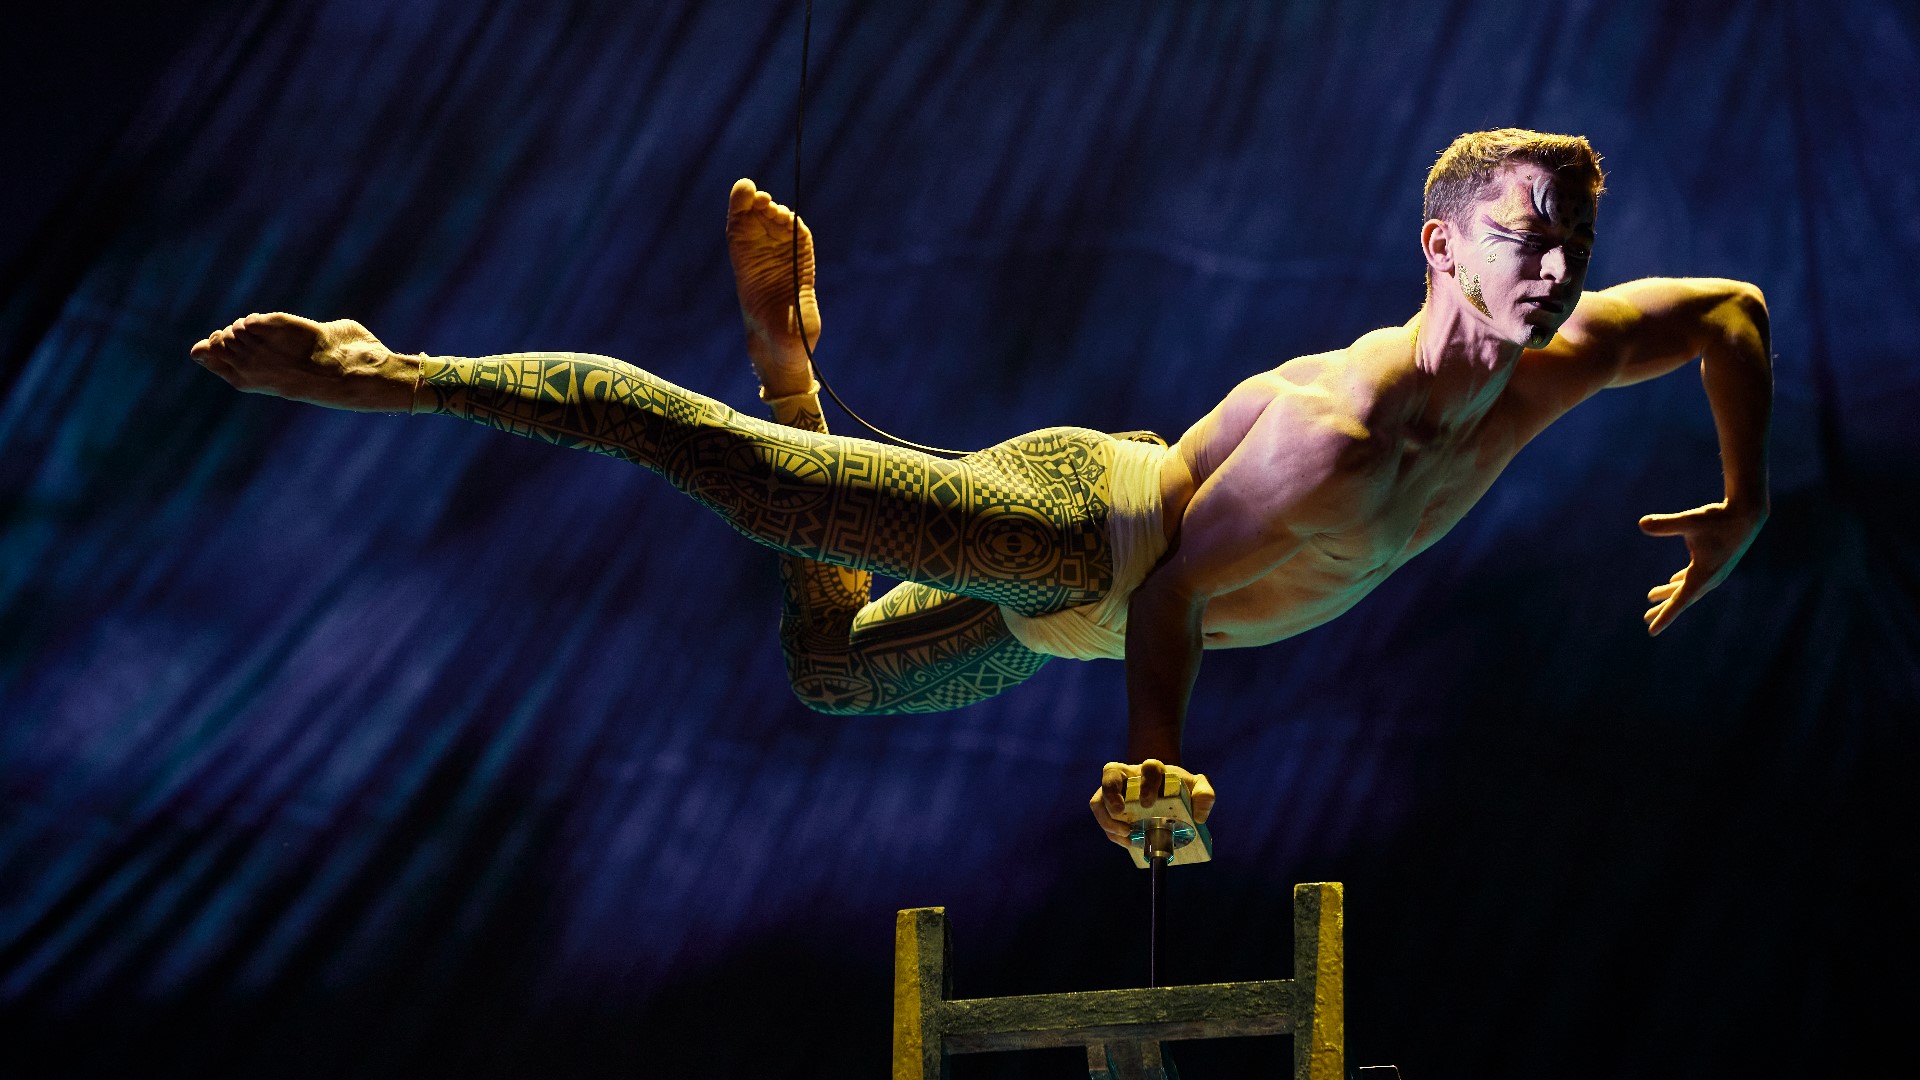 Over the years, more than 215 million people have been inspired, in over 70 different countries, by Cirque du Soleil's Kooza.